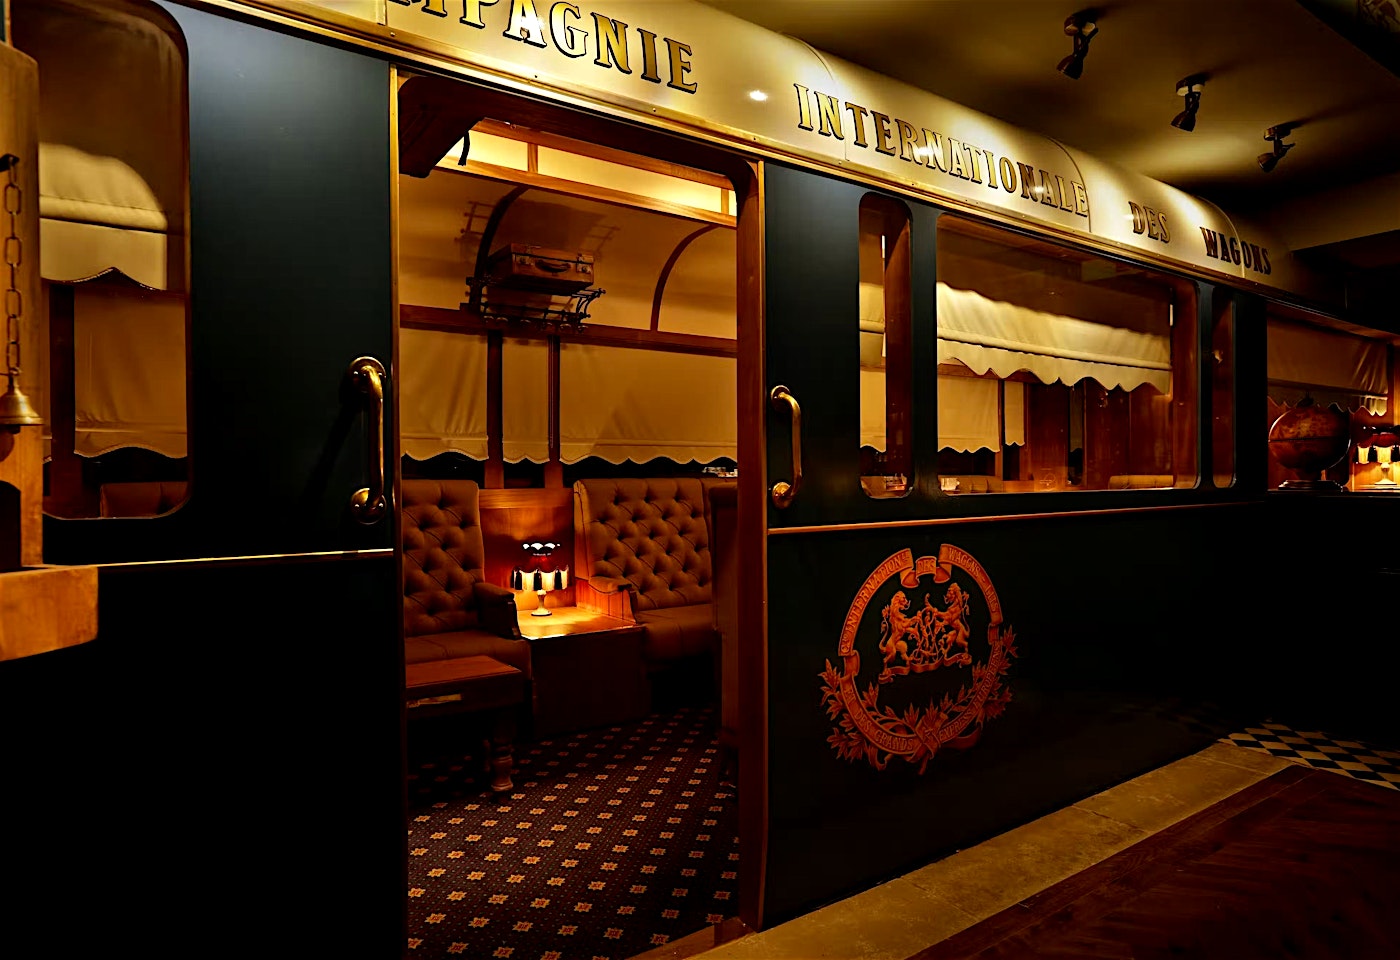 A train-carriage style area inside this Covent Garden cocktail bar